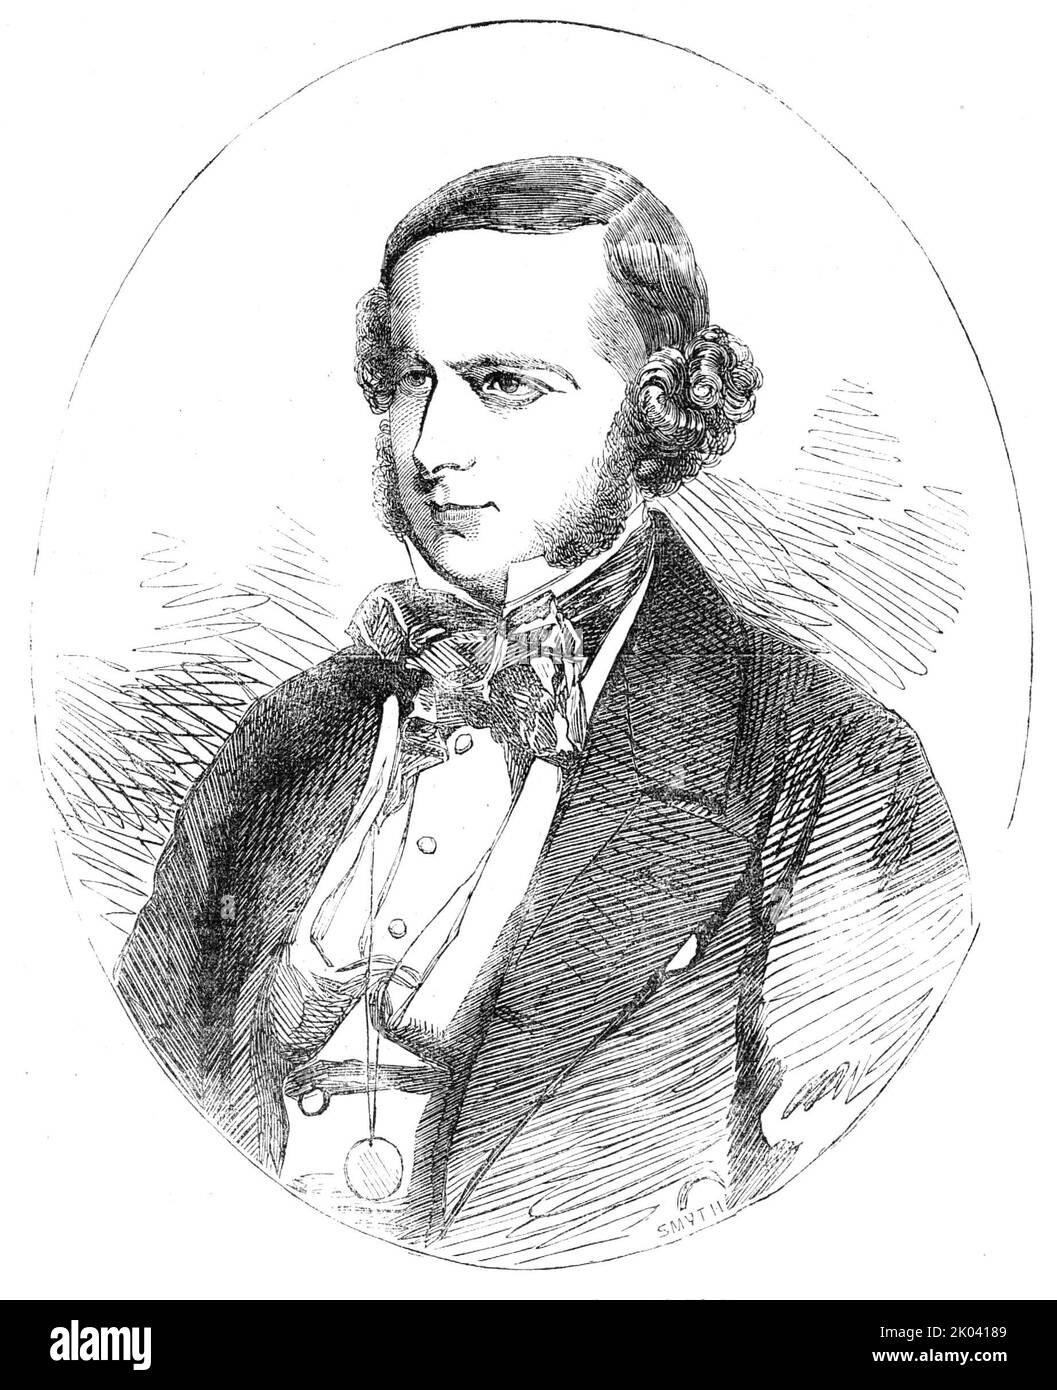 The Hon. F. Leveson-Gower, M.P., Seconder of the Address to Her Majesty, in the House of Commons - from a drawing by Baugniet, 1854. British politician and autobiographer Edward Frederick Leveson-Gower. 'At the general election of 1852 he successfully contested Stoke-upon-Trent, which seat he still retains...Mr. Gower is of decidedly Liberal principles, a friend of reform, a consistent supporter of progress, and an uncompromising Free-trader. It is believed that on Tuesday he made his maiden speech, though he has been so long a member of the House; and he was somewhat rewarded for his patient Stock Photo